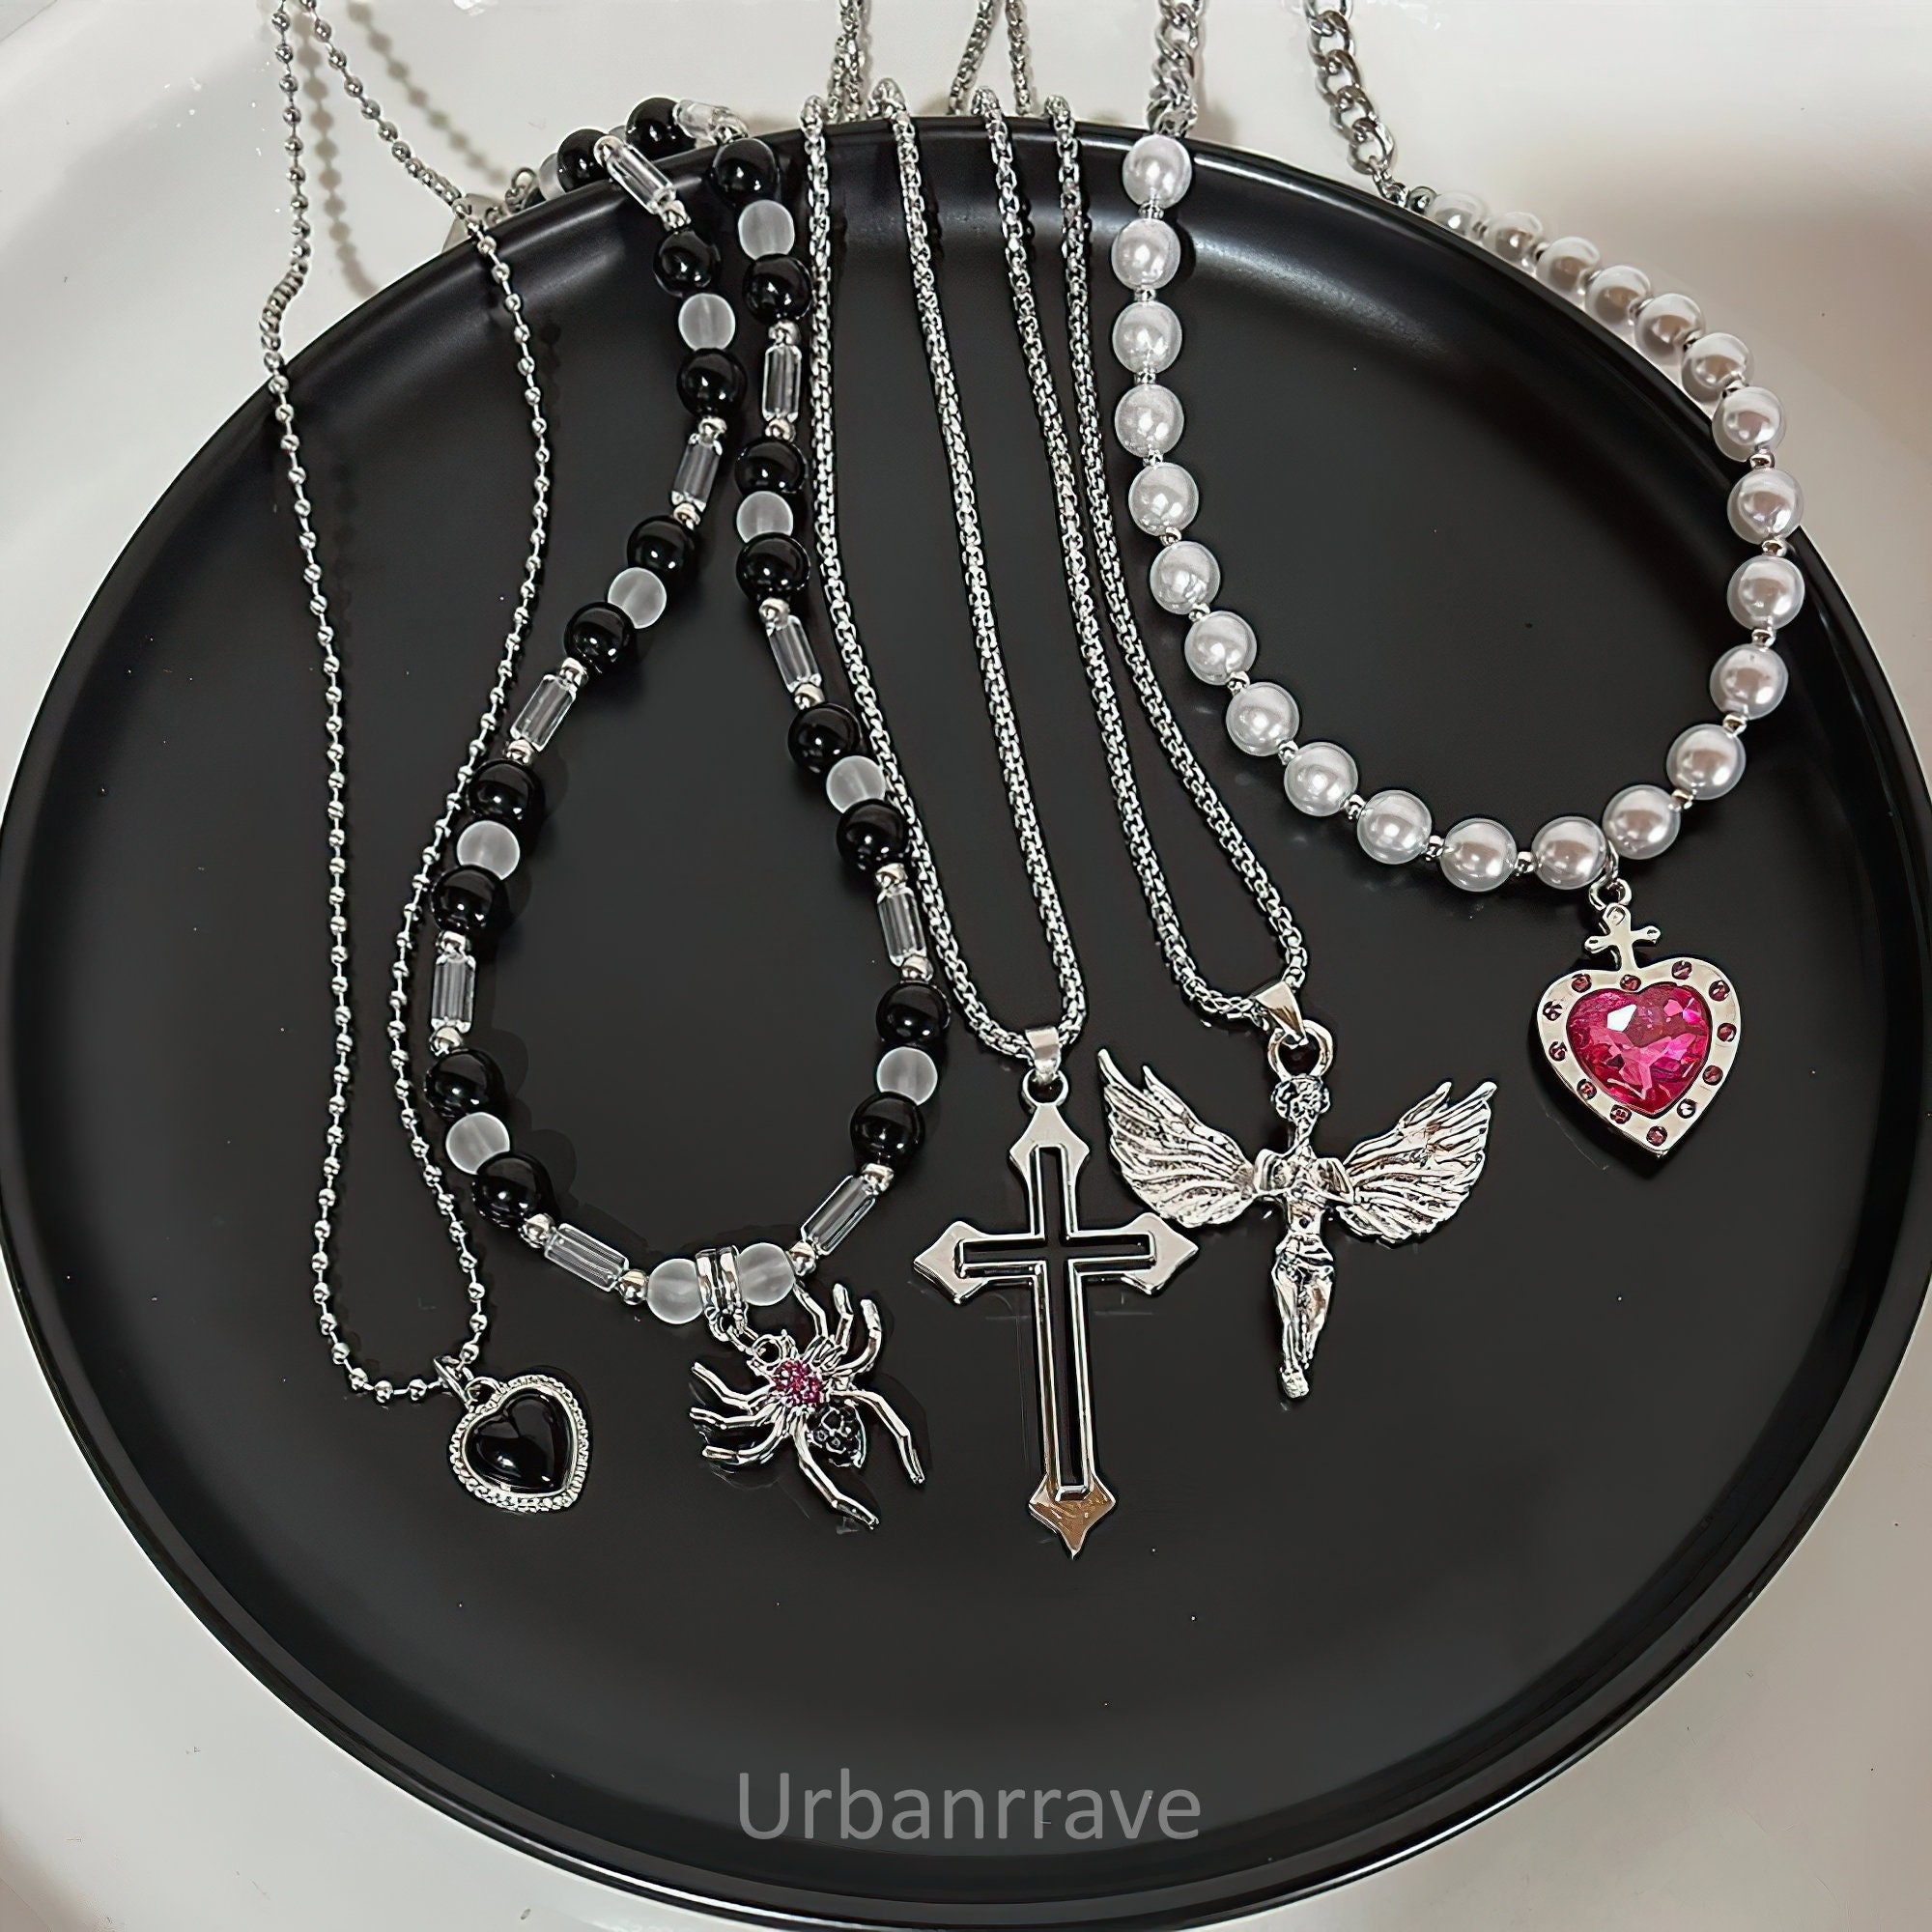 Kpop Goth Vintage Cool Y2K Star Pendant Beaded Silver Color Chain Necklace  For Women Men Aesthetic Grunge EMO Jewely Accessory